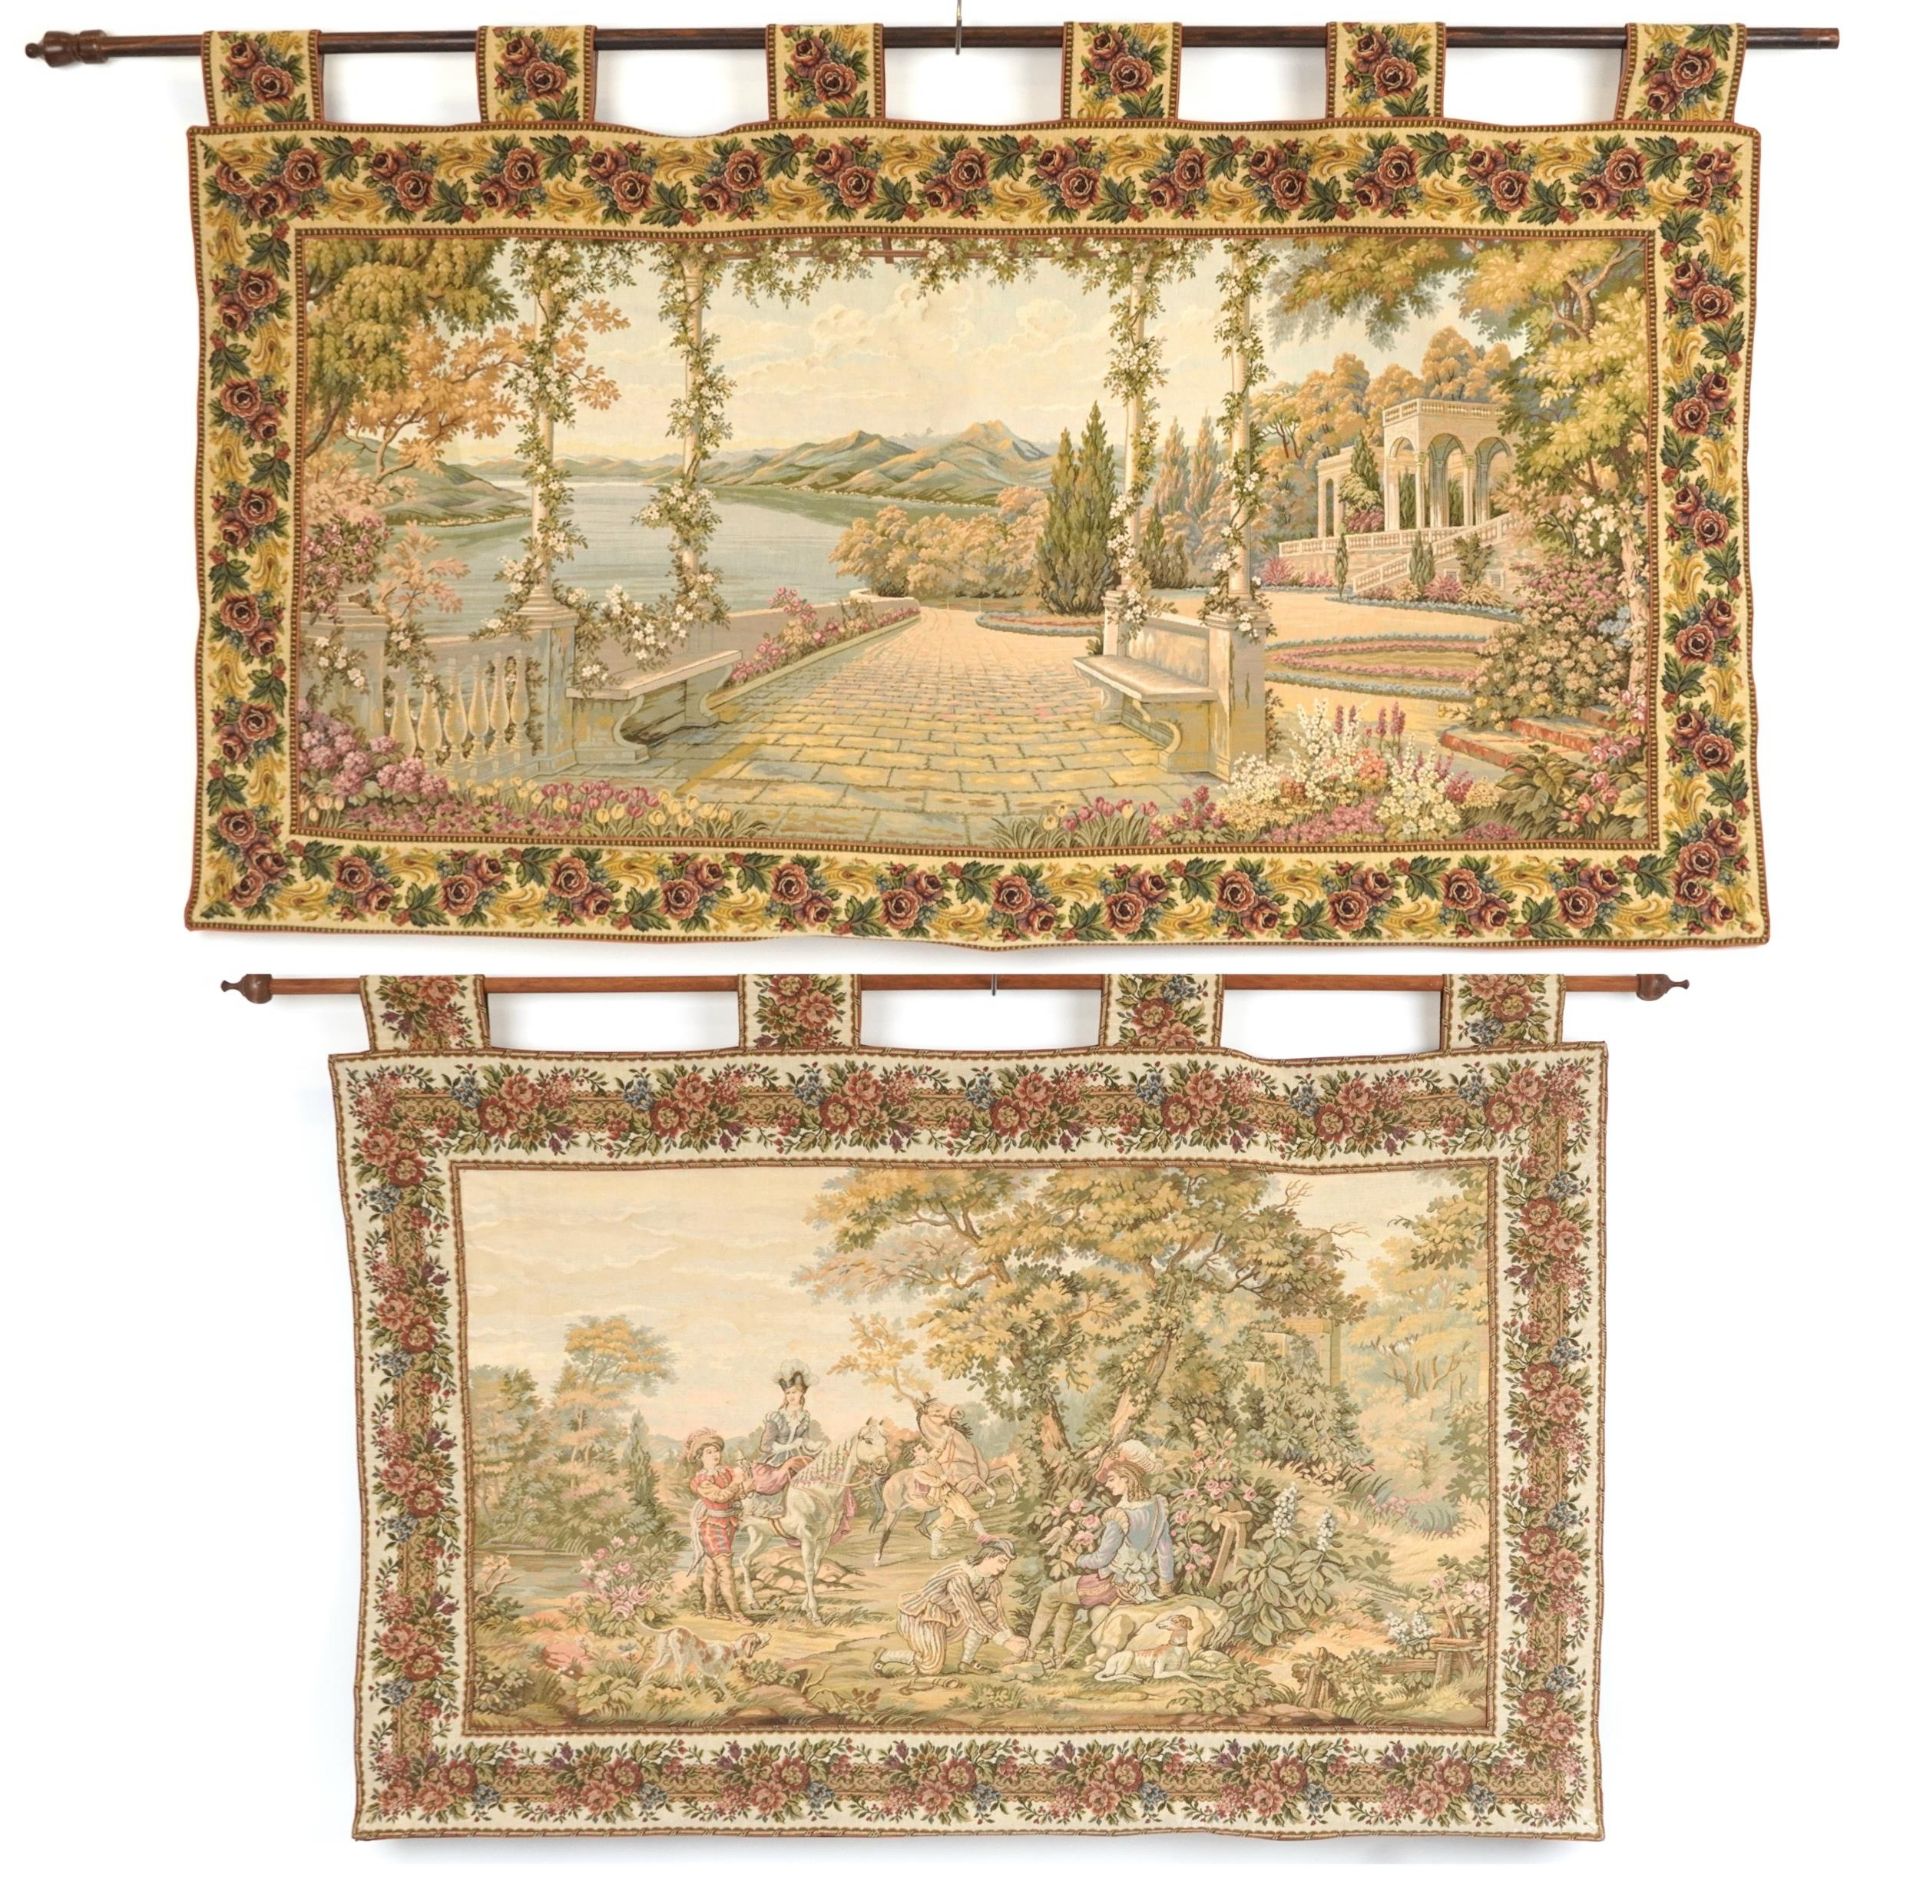 Two rectangular wall hanging tapestries including one with a courting couple on horseback, the